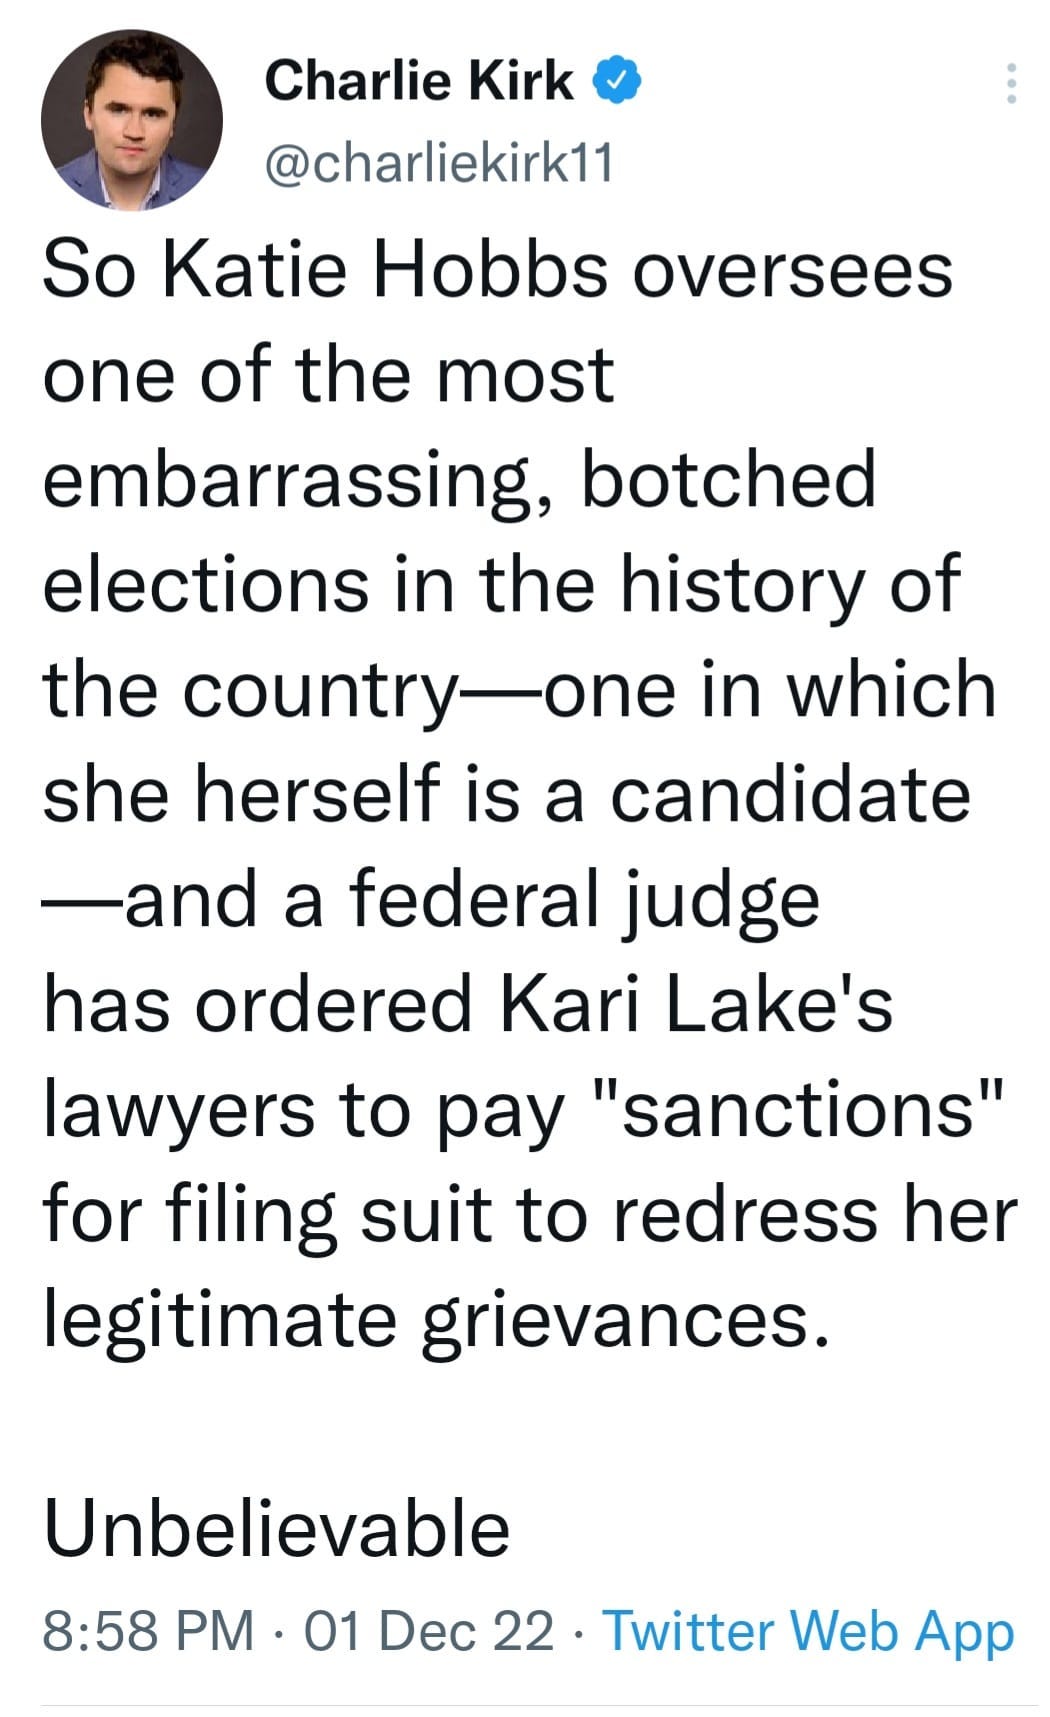 May be an image of 1 person and text that says 'Charlie Kirk @charliekirk11 So Katie Hobbs oversees one of the most embarrassing, botched elections in the history of the country-one in which she herself is a candidate -and a federal judge has ordered Kari Lake's lawyers to pay "sanctions" for filing suit to redress her legitimate grievances. Unbelievable 8:58 PM 01 Dec 22 Twitter Web App'